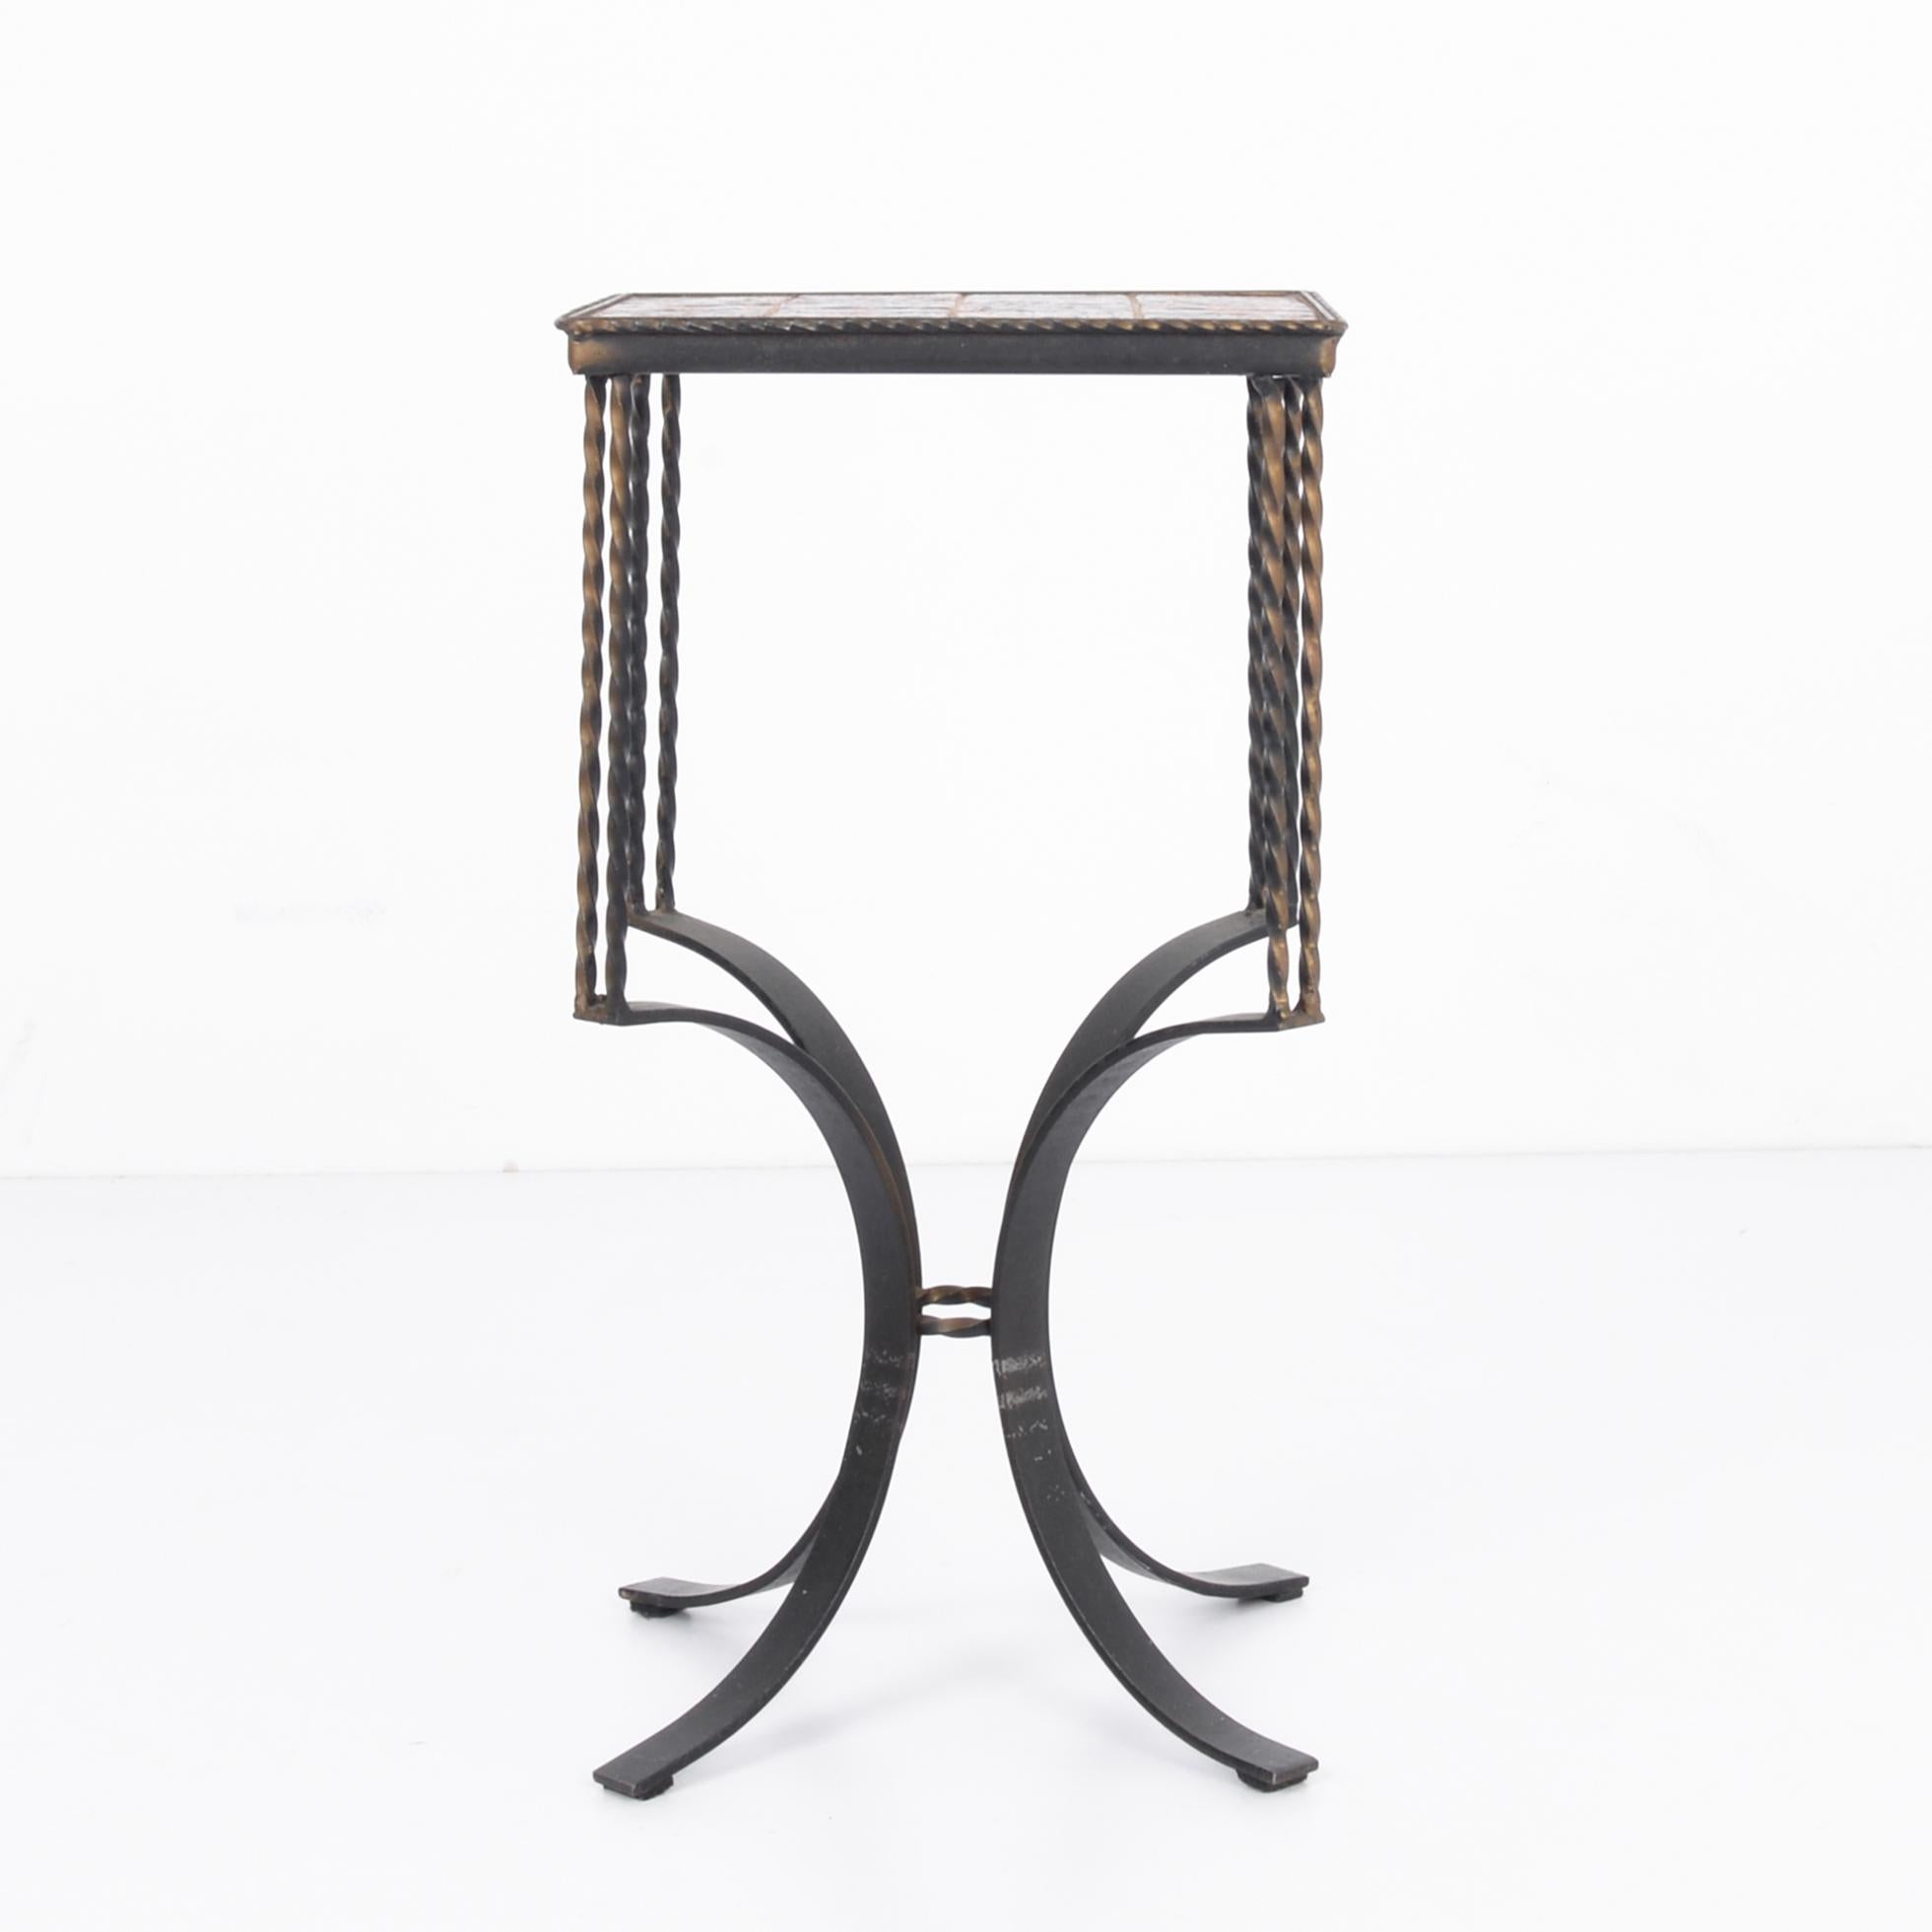 A small vintage metal side table with ceramic top produced in France, circa 1900. Delicate power play of springing torsion beginning in four flat planes of curved metal, each supporting spiraling twin spokes of a deconstructed double helix, all